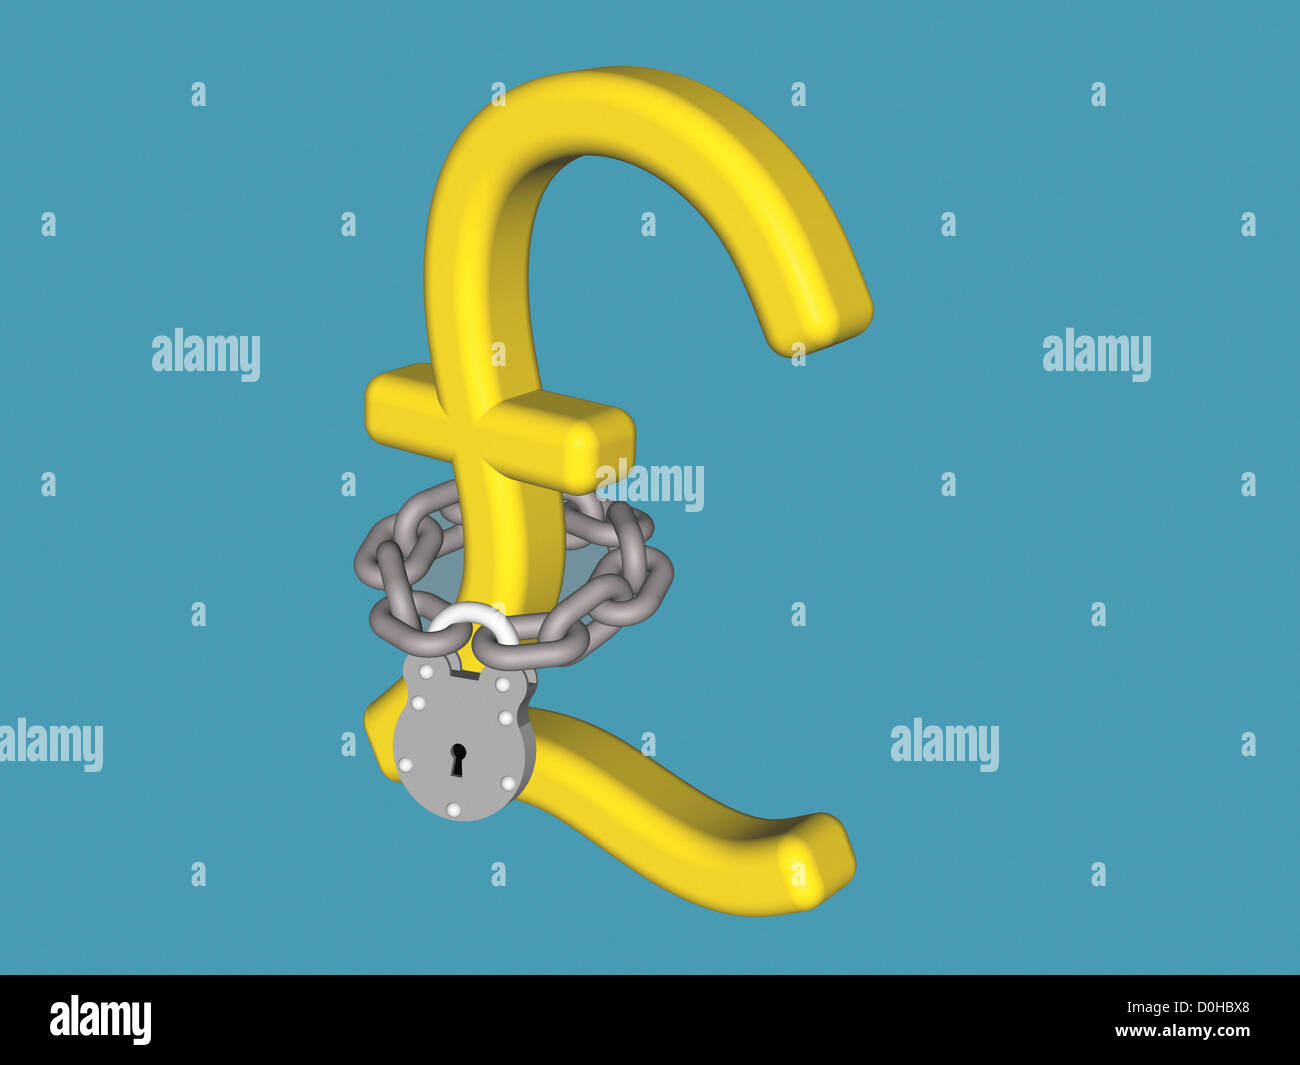 Illustration of a Pound Symbol Chained and Padlocked Stock Photo